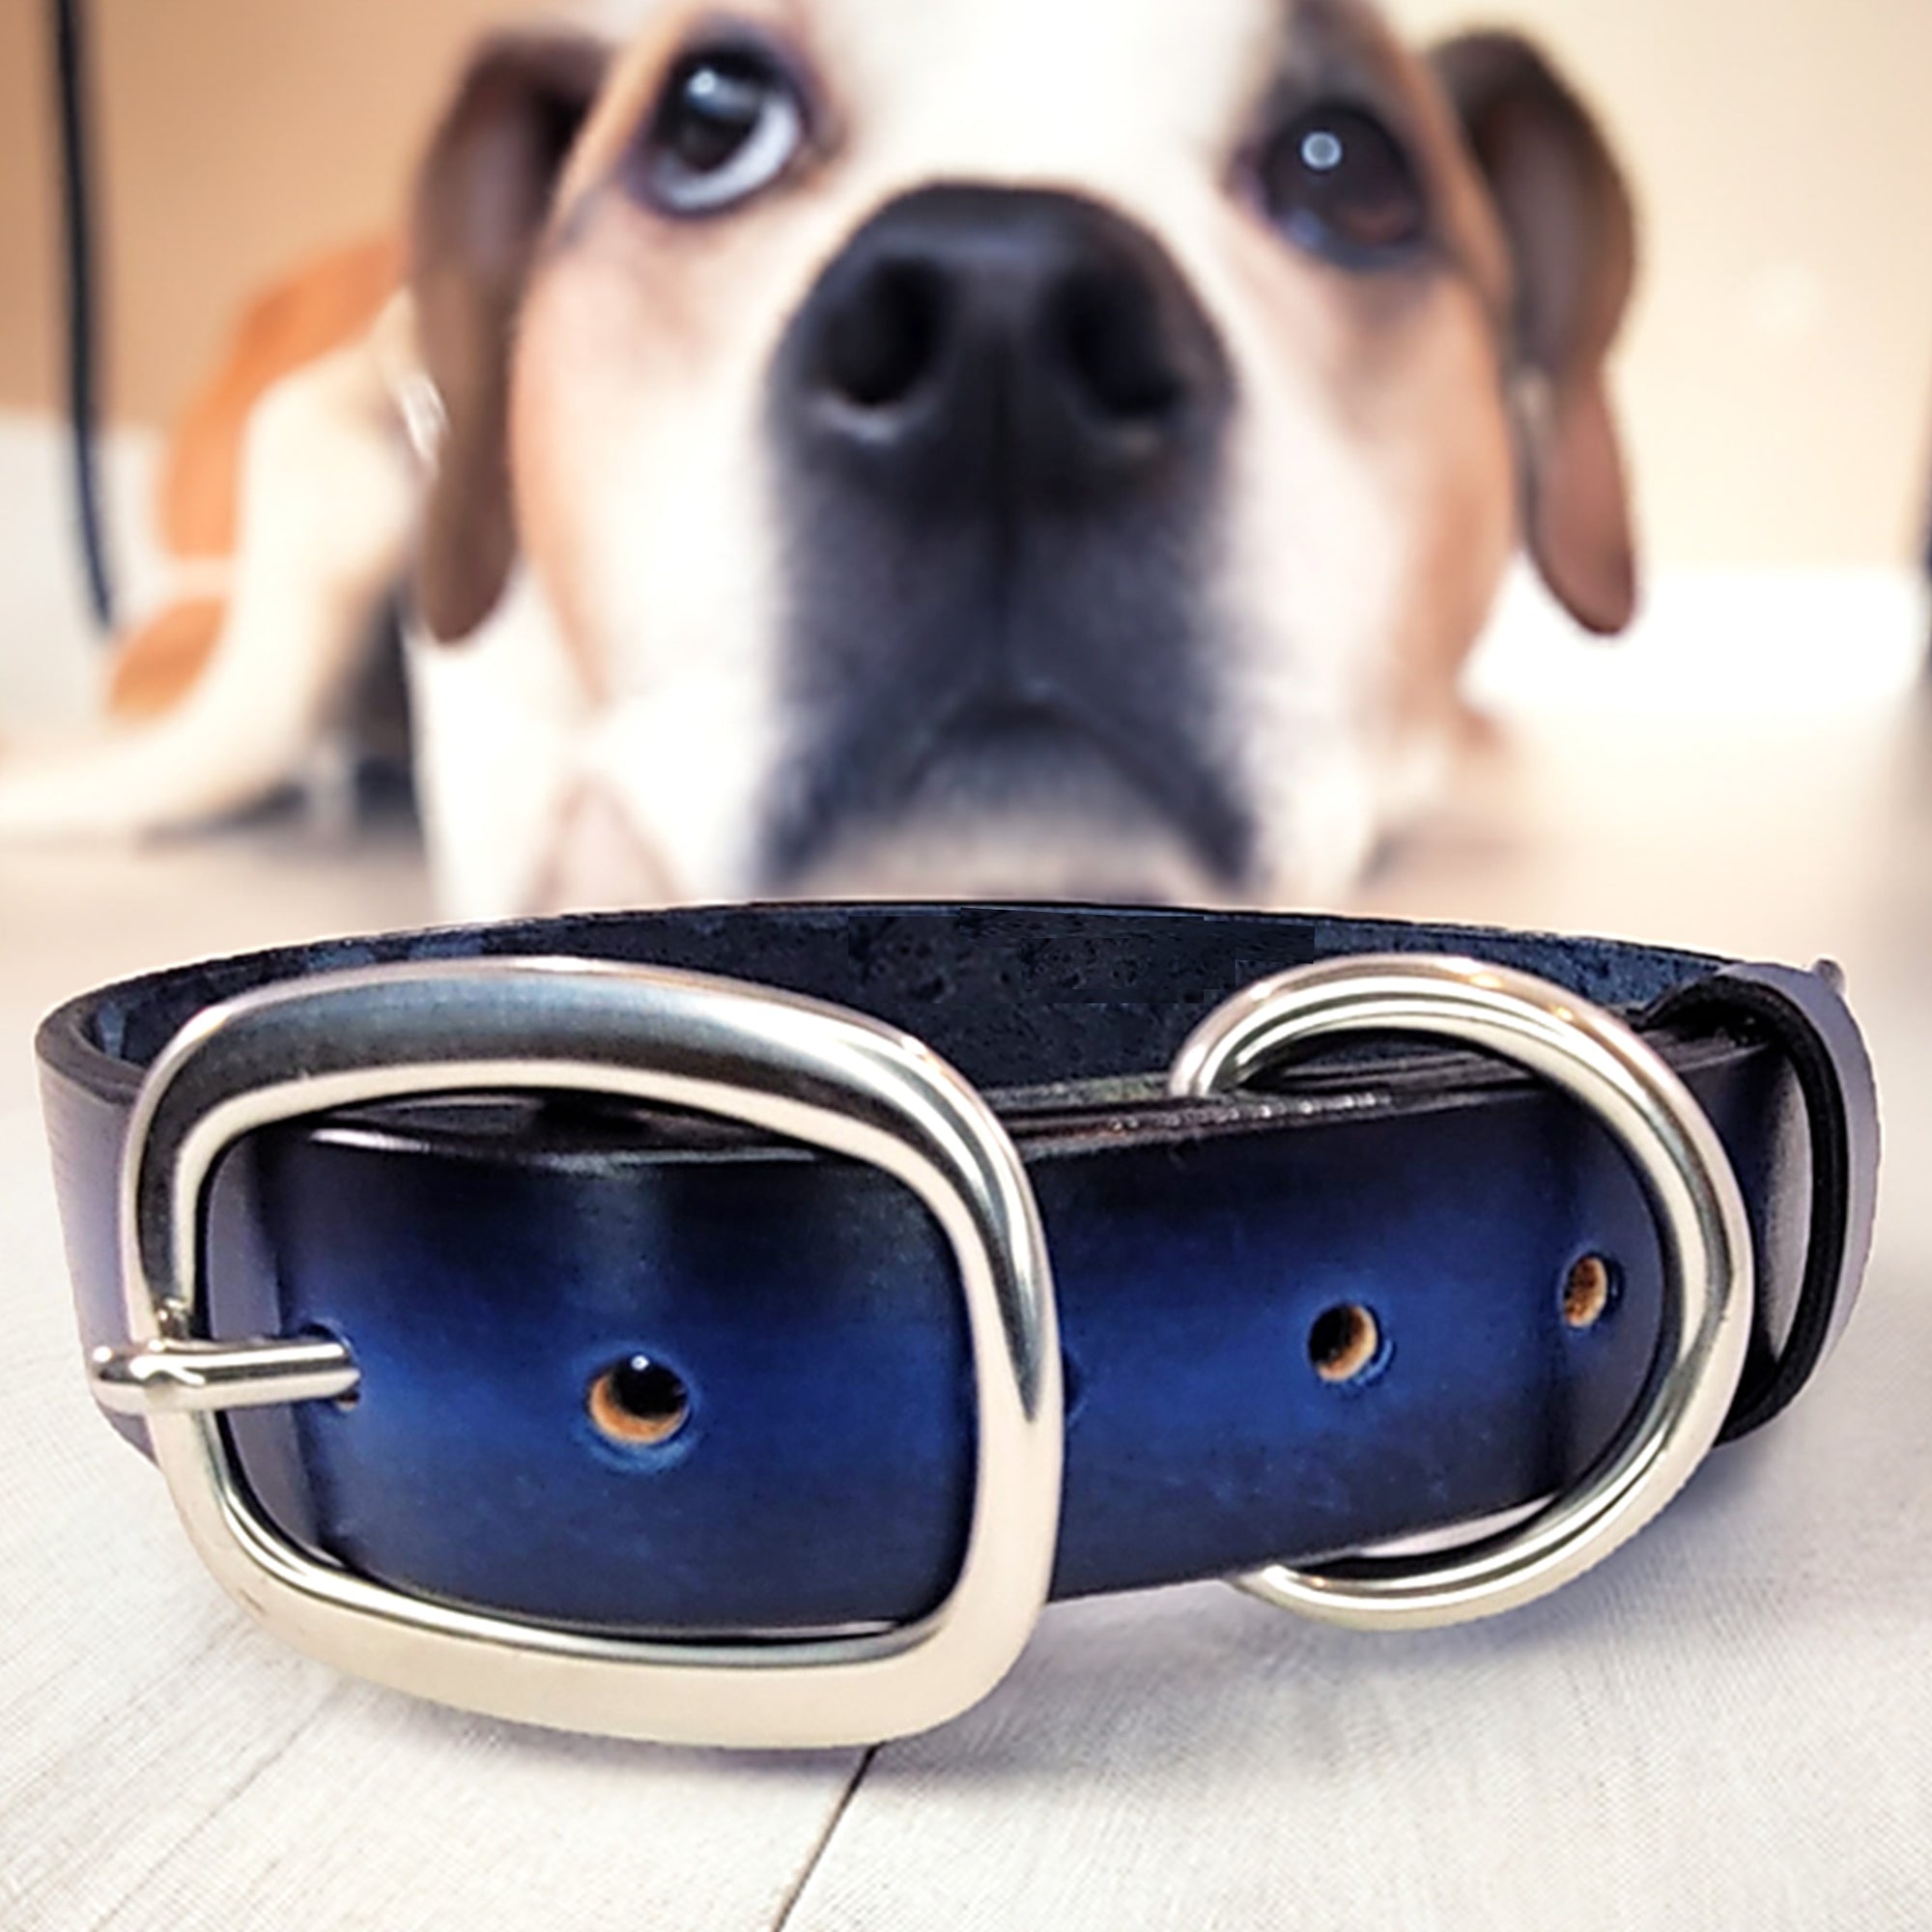 Leather dog collar blue with dog in the back by toe beans 2